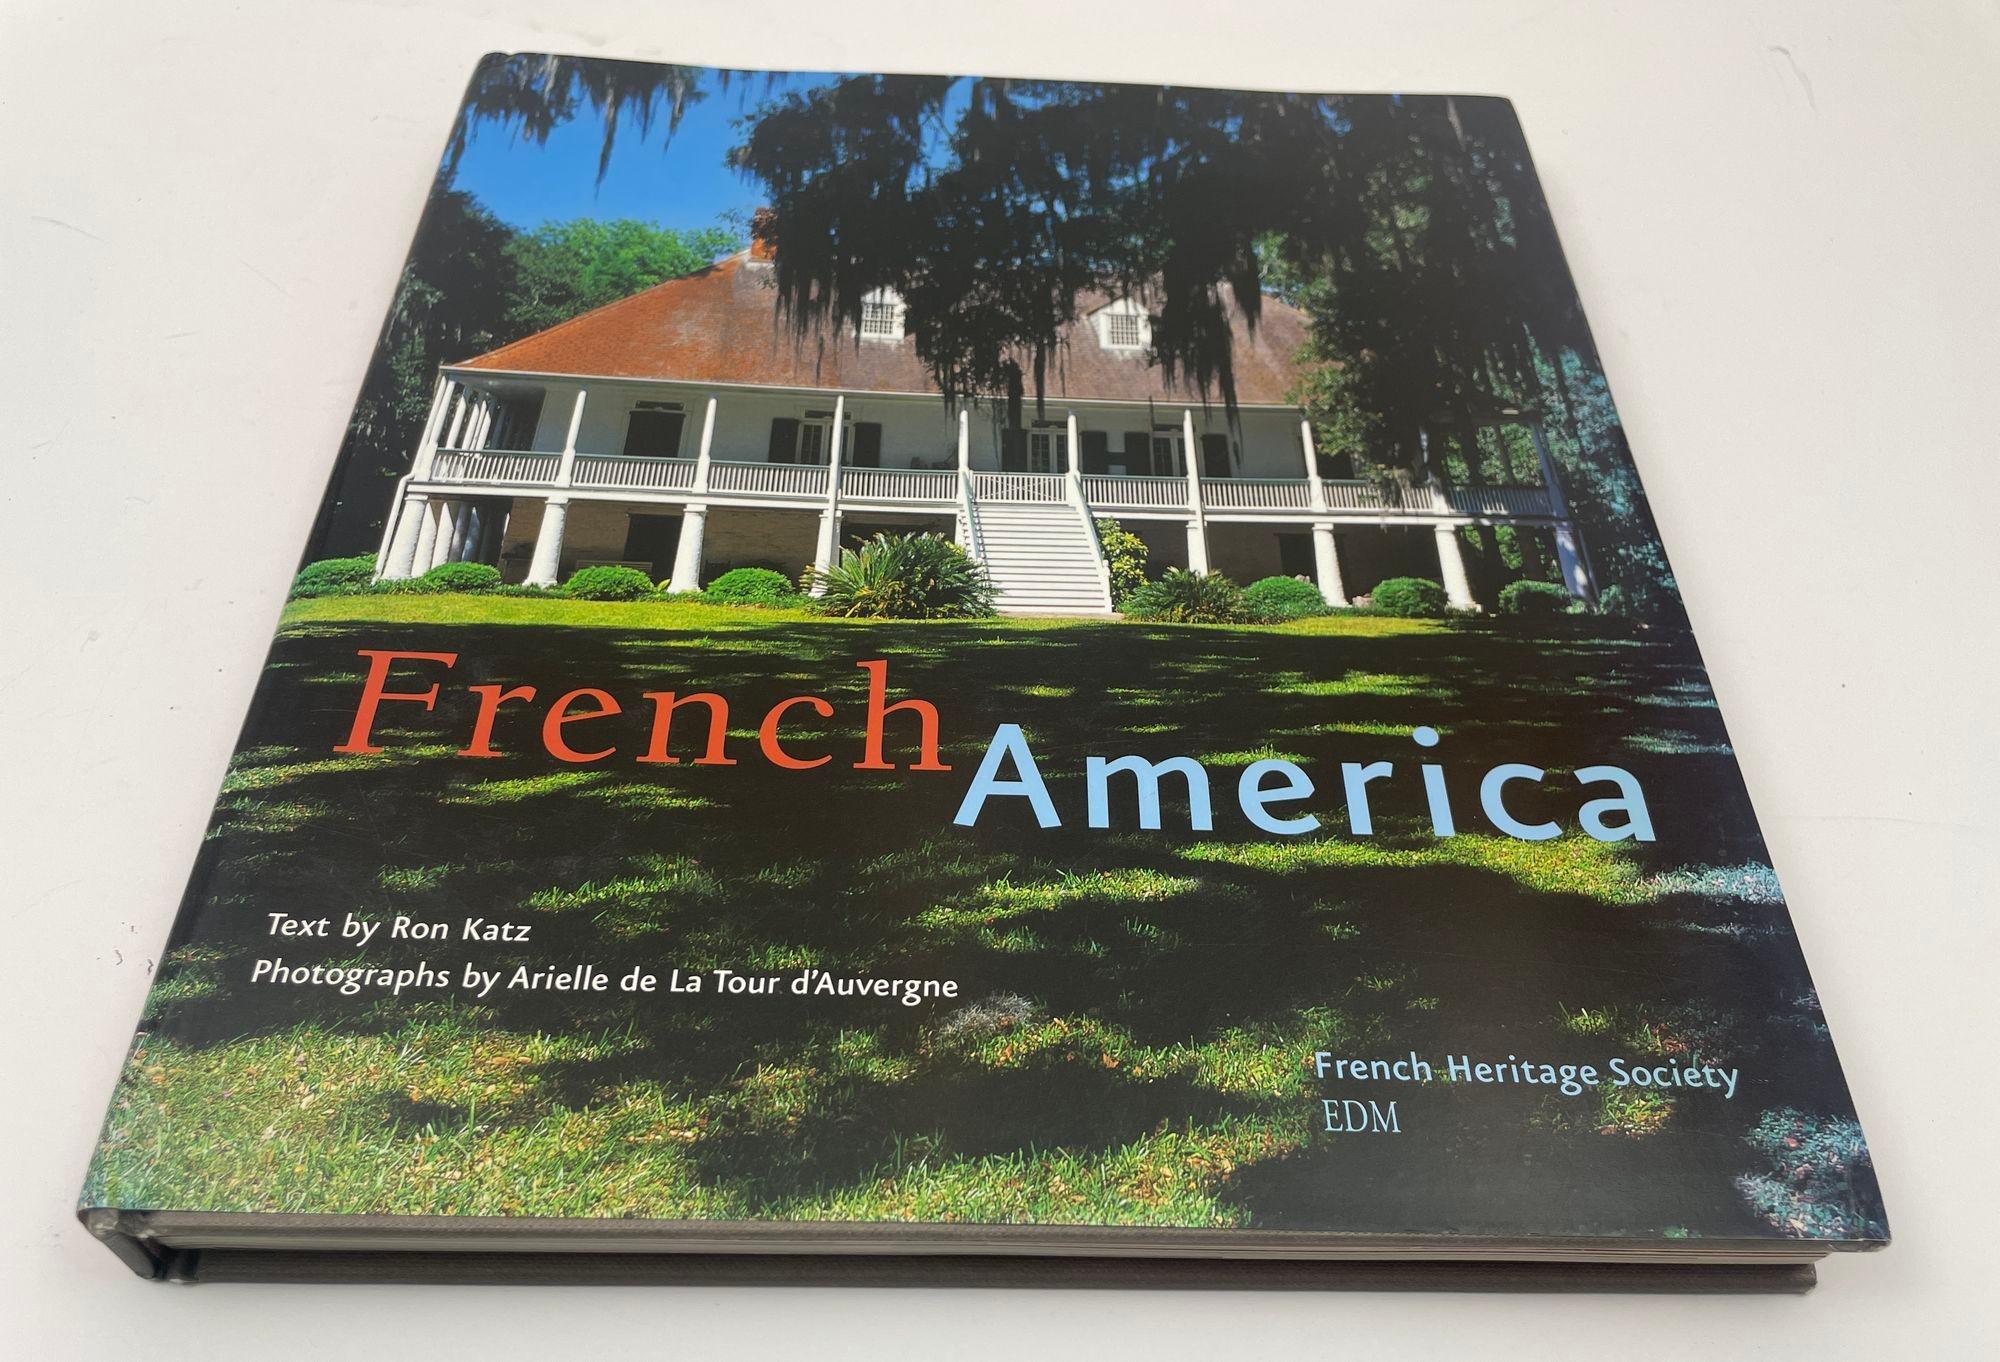 French America by Ron Katz photographs by Arielle de la Tour d'Auvergne.
French America: French architecture from colonisation to the birth of a nation.
Condition is very good.
A tight, clean copy.
Dustjacket is very good with light shelf wear.
A